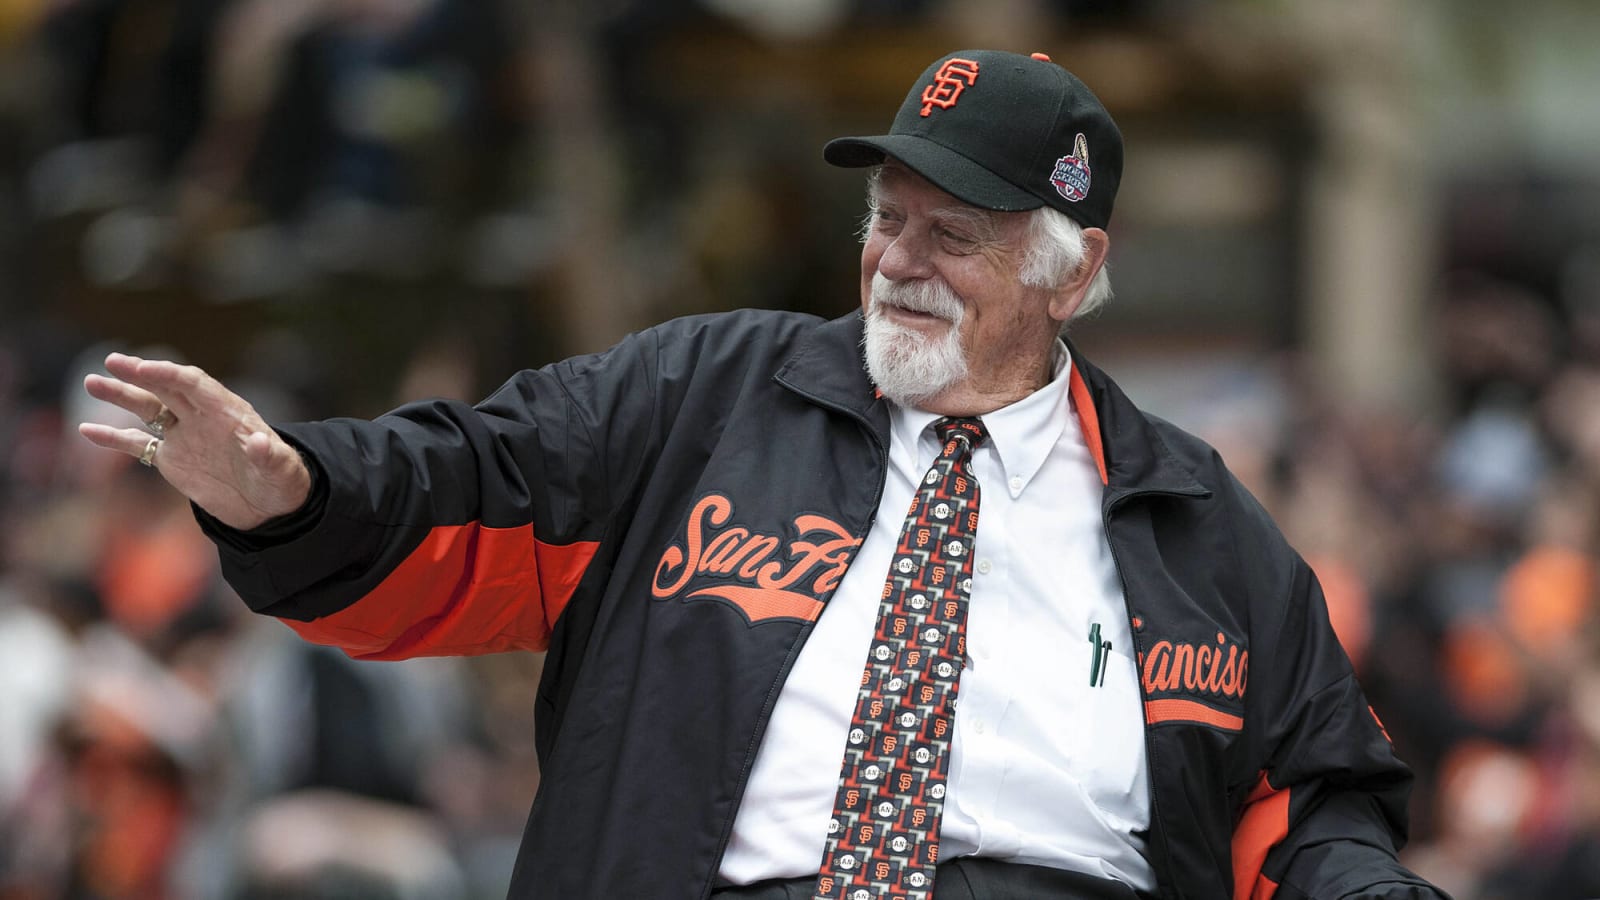 The moonshot story of Giants' Gaylord Perry was labeled a 'legend' by  Snopes. Is that fair?